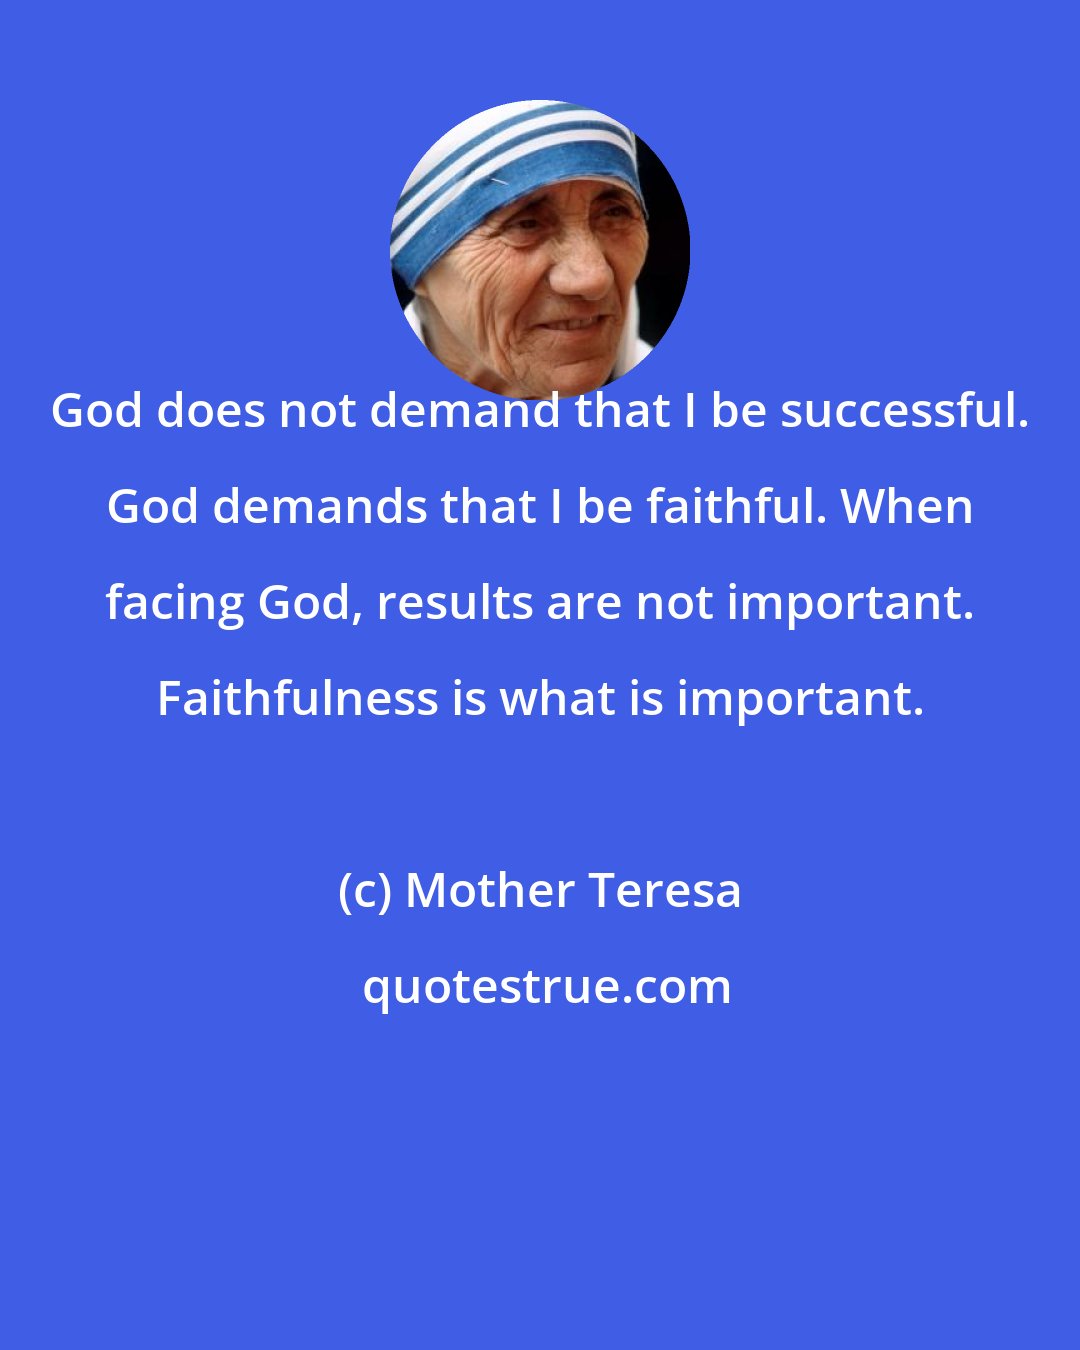 Mother Teresa: God does not demand that I be successful. God demands that I be faithful. When facing God, results are not important. Faithfulness is what is important.